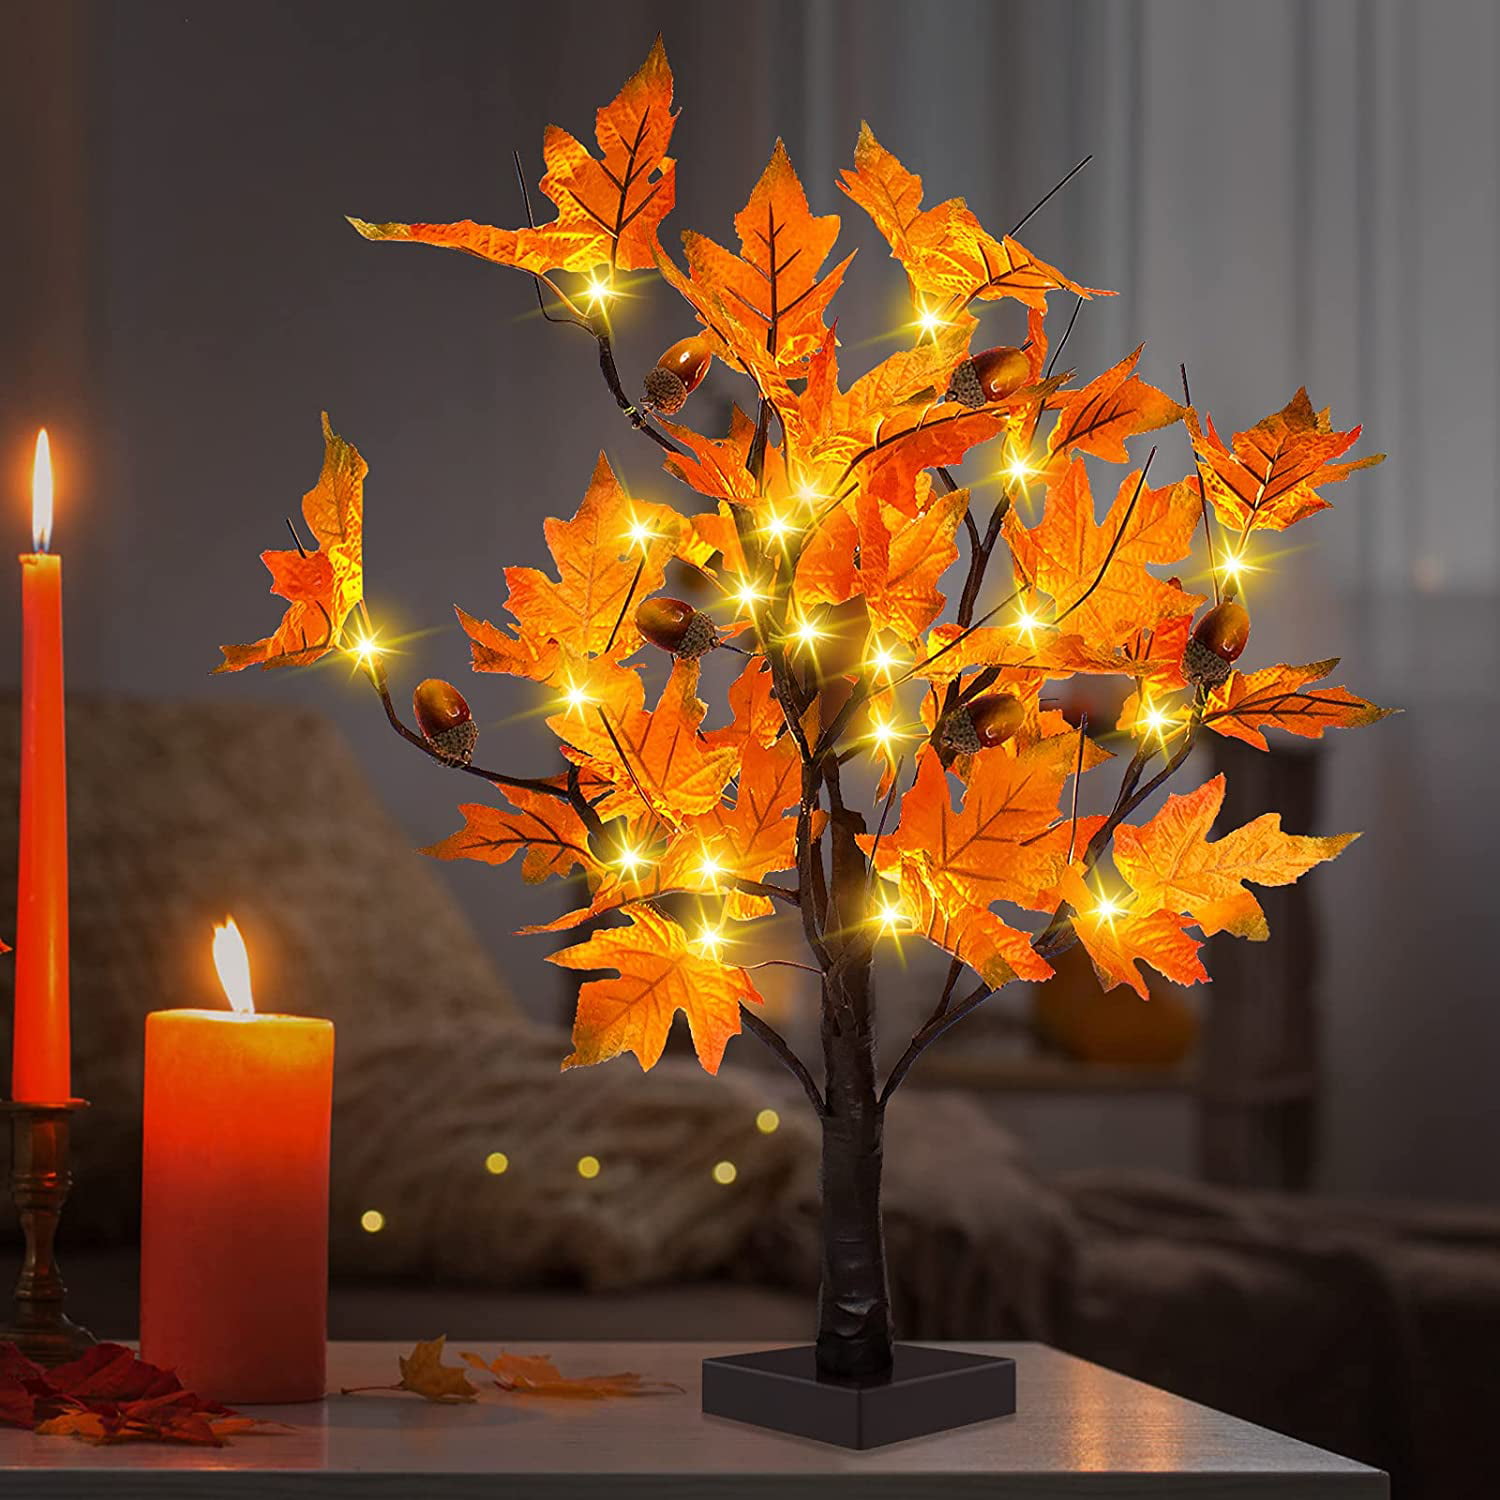 24 LED Lighted Tabletop Fall Maple Tree Xmas Decor Thanksgiving Decoration Table 